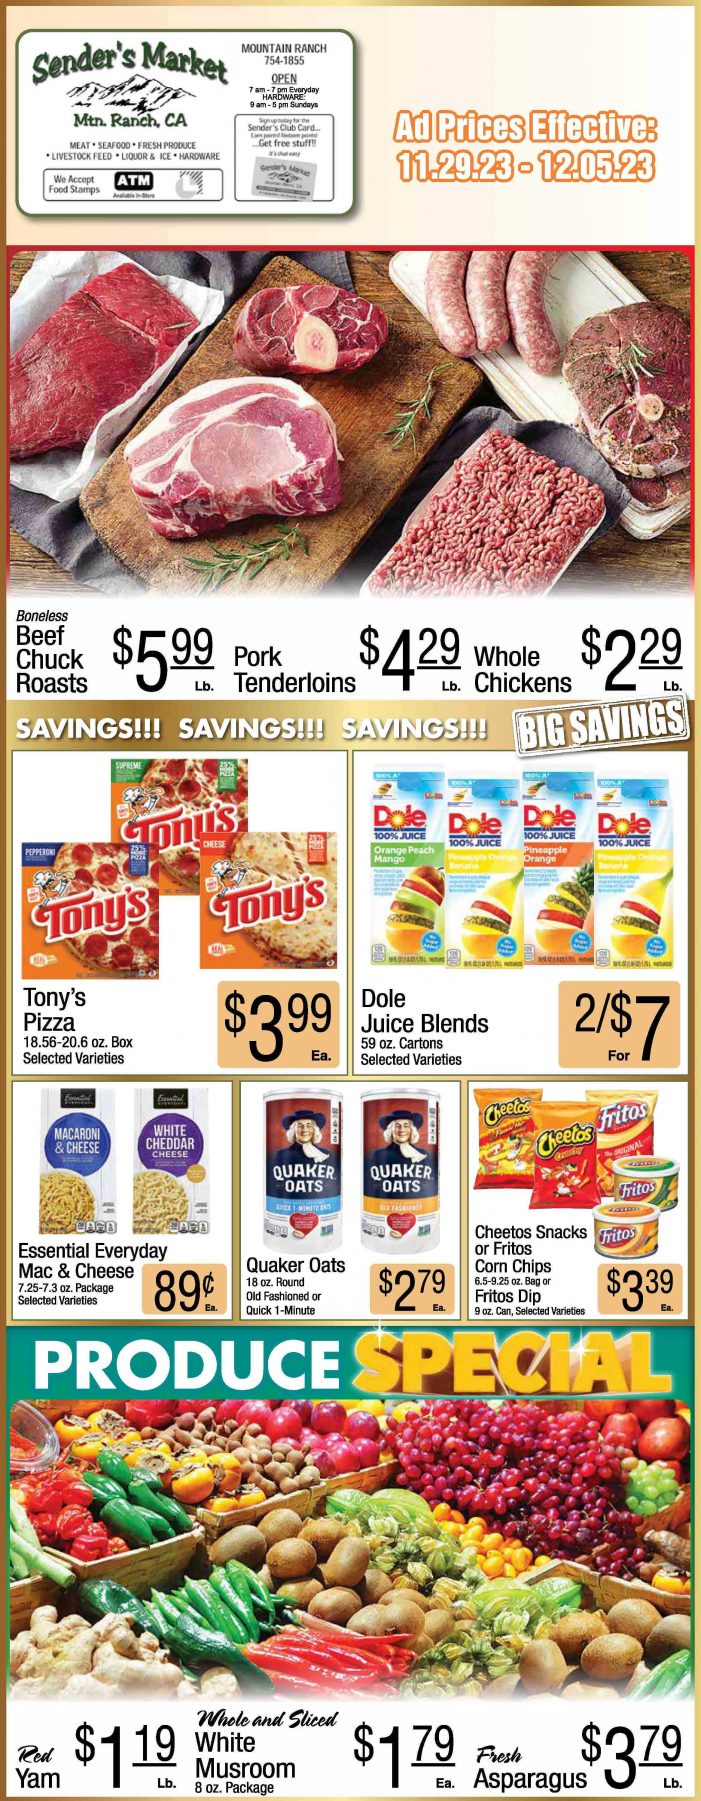 Sender’s Market Weekly Ad & Grocery Specials Through December 5th! Shop Local & Save!!